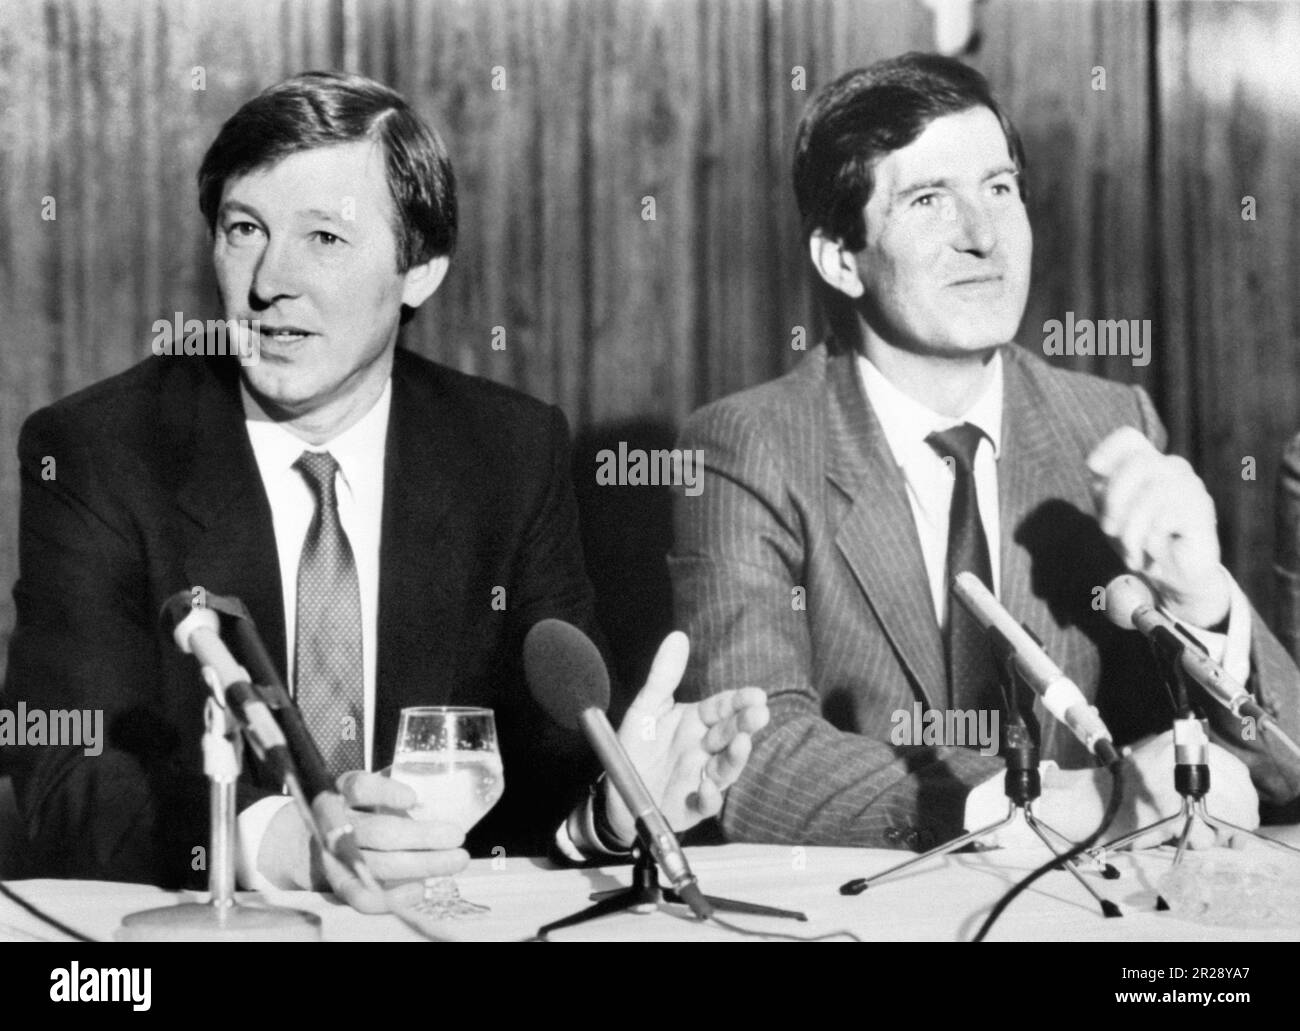 File photo dated 07-11-1986 of Alex Ferguson being unveiled as Manchester United's new manager by chairman Martin Edwards. It's been 10 years since Sir Alex Ferguson's last match in charge of Manchester United. His trophy-laden reign at Manchester United was illuminated by his often fiery rhetoric. On challenging times 'My greatest challenge is not what's happening at the moment, my greatest challenge was knocking Liverpool right off their f***ing perch. And you can print that.' Issue date: Thursday May 18, 2023. Stock Photo